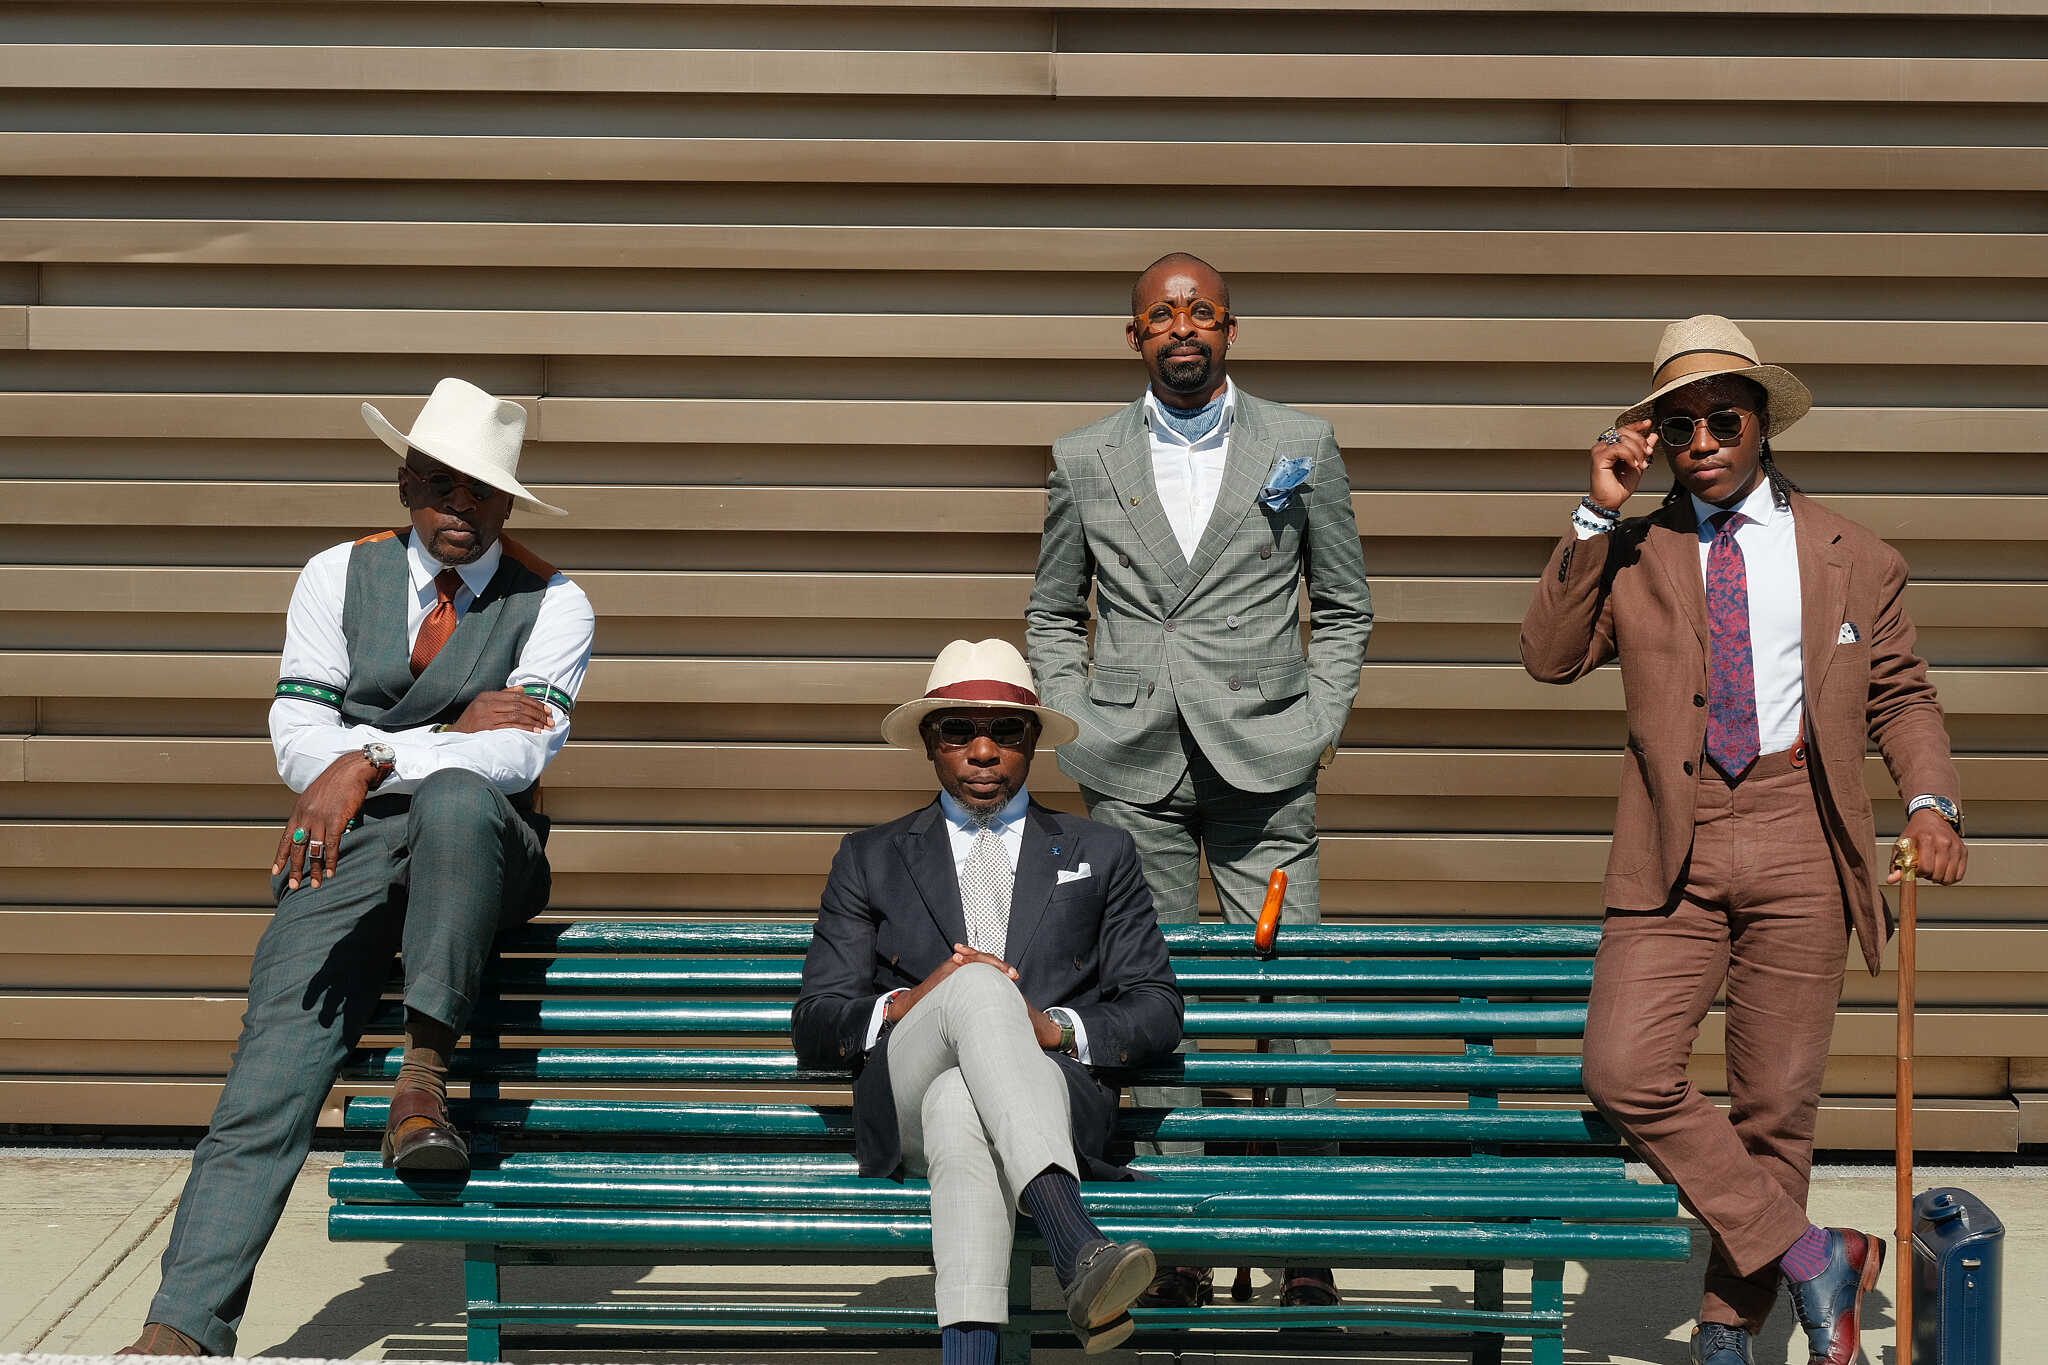 Photos From Pitti Uomo 100th in Florence by Alessandro Michelazzi Photographer